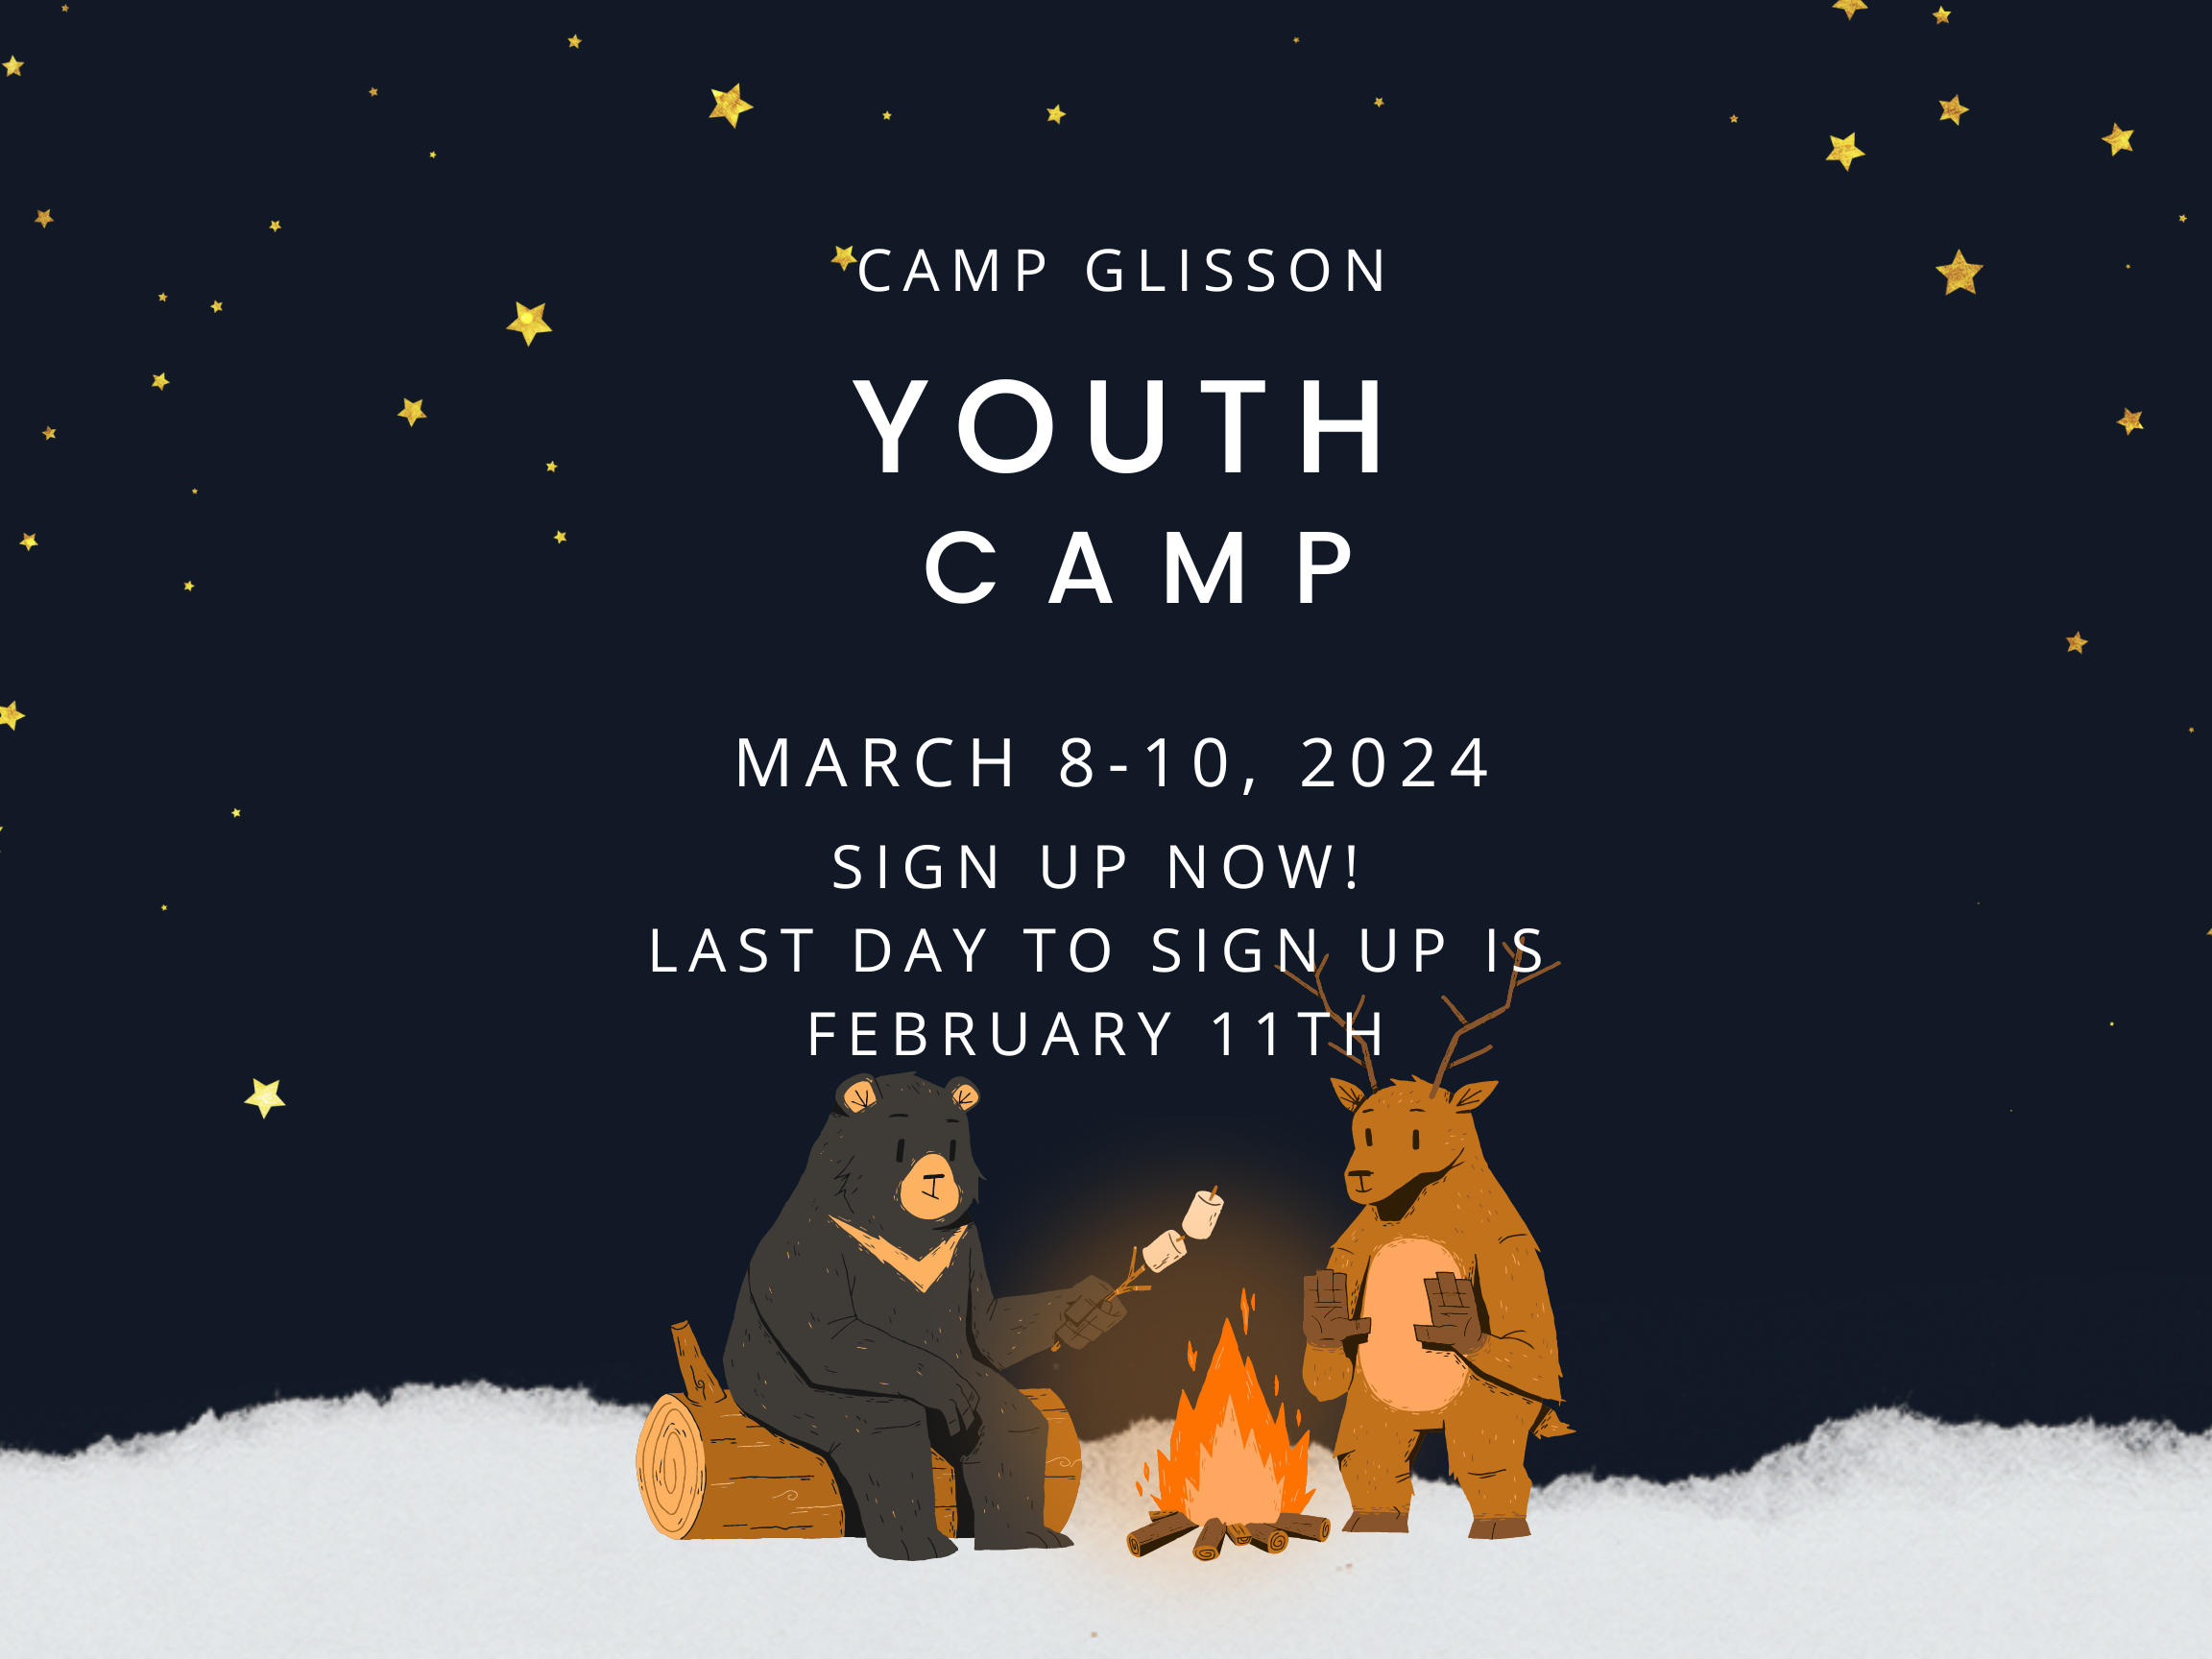 Youth Camp at Camp Glisson